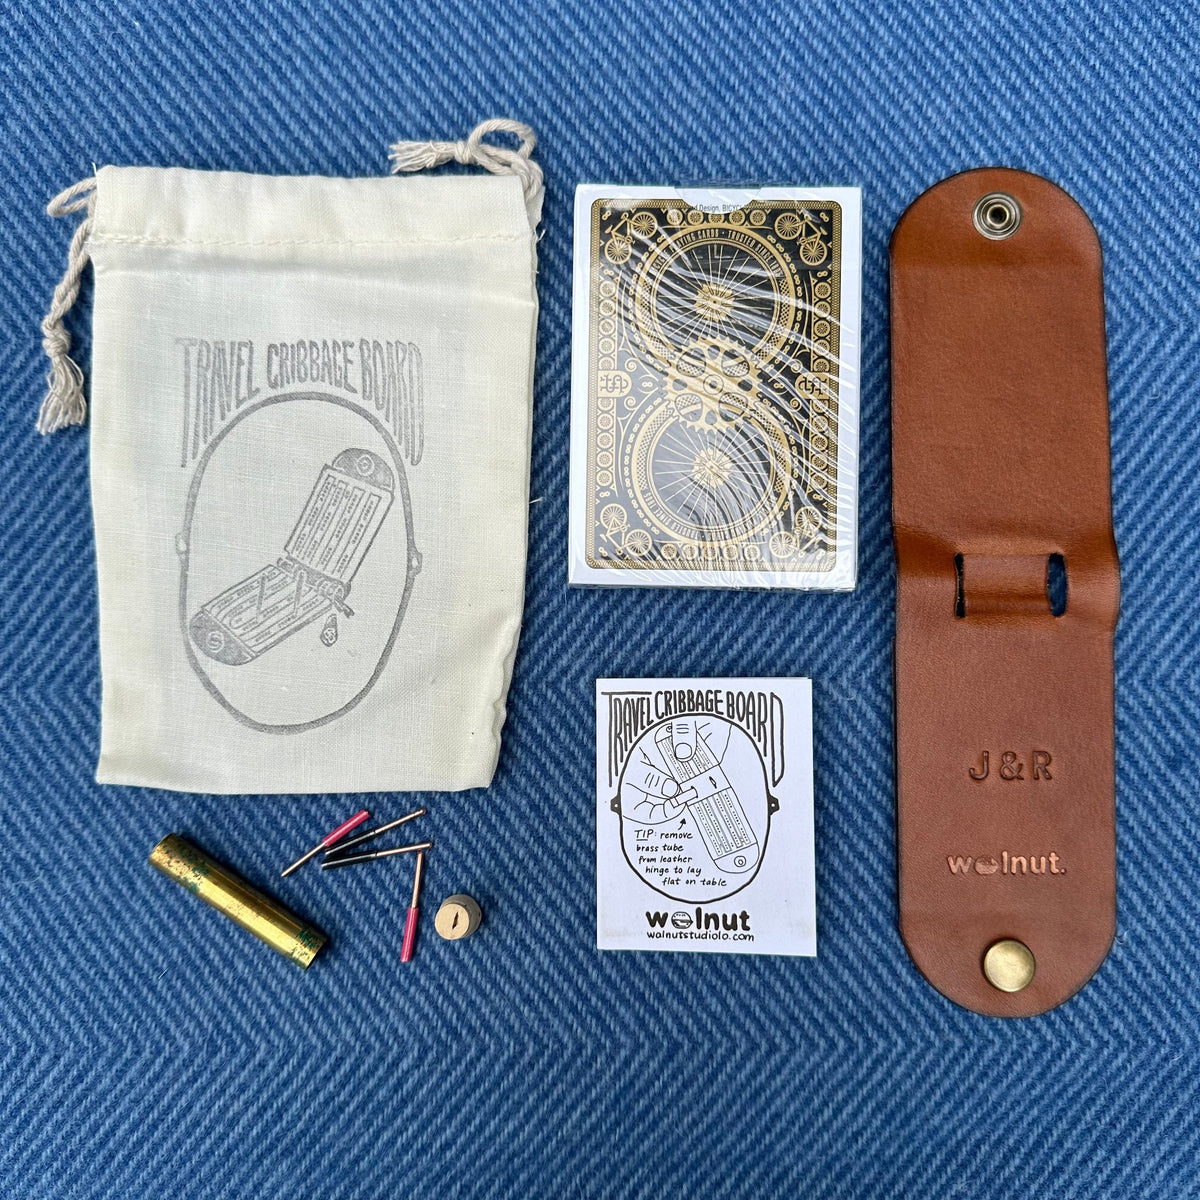 Walnut Studiolo AS-IS AS-IS SALE Original Travel Cribbage Board &quot;J&amp;R&quot; Monogram, Tarnished Wire Peg Tube, Gift Set with Tight Strings and New 1885 Cards (#004)